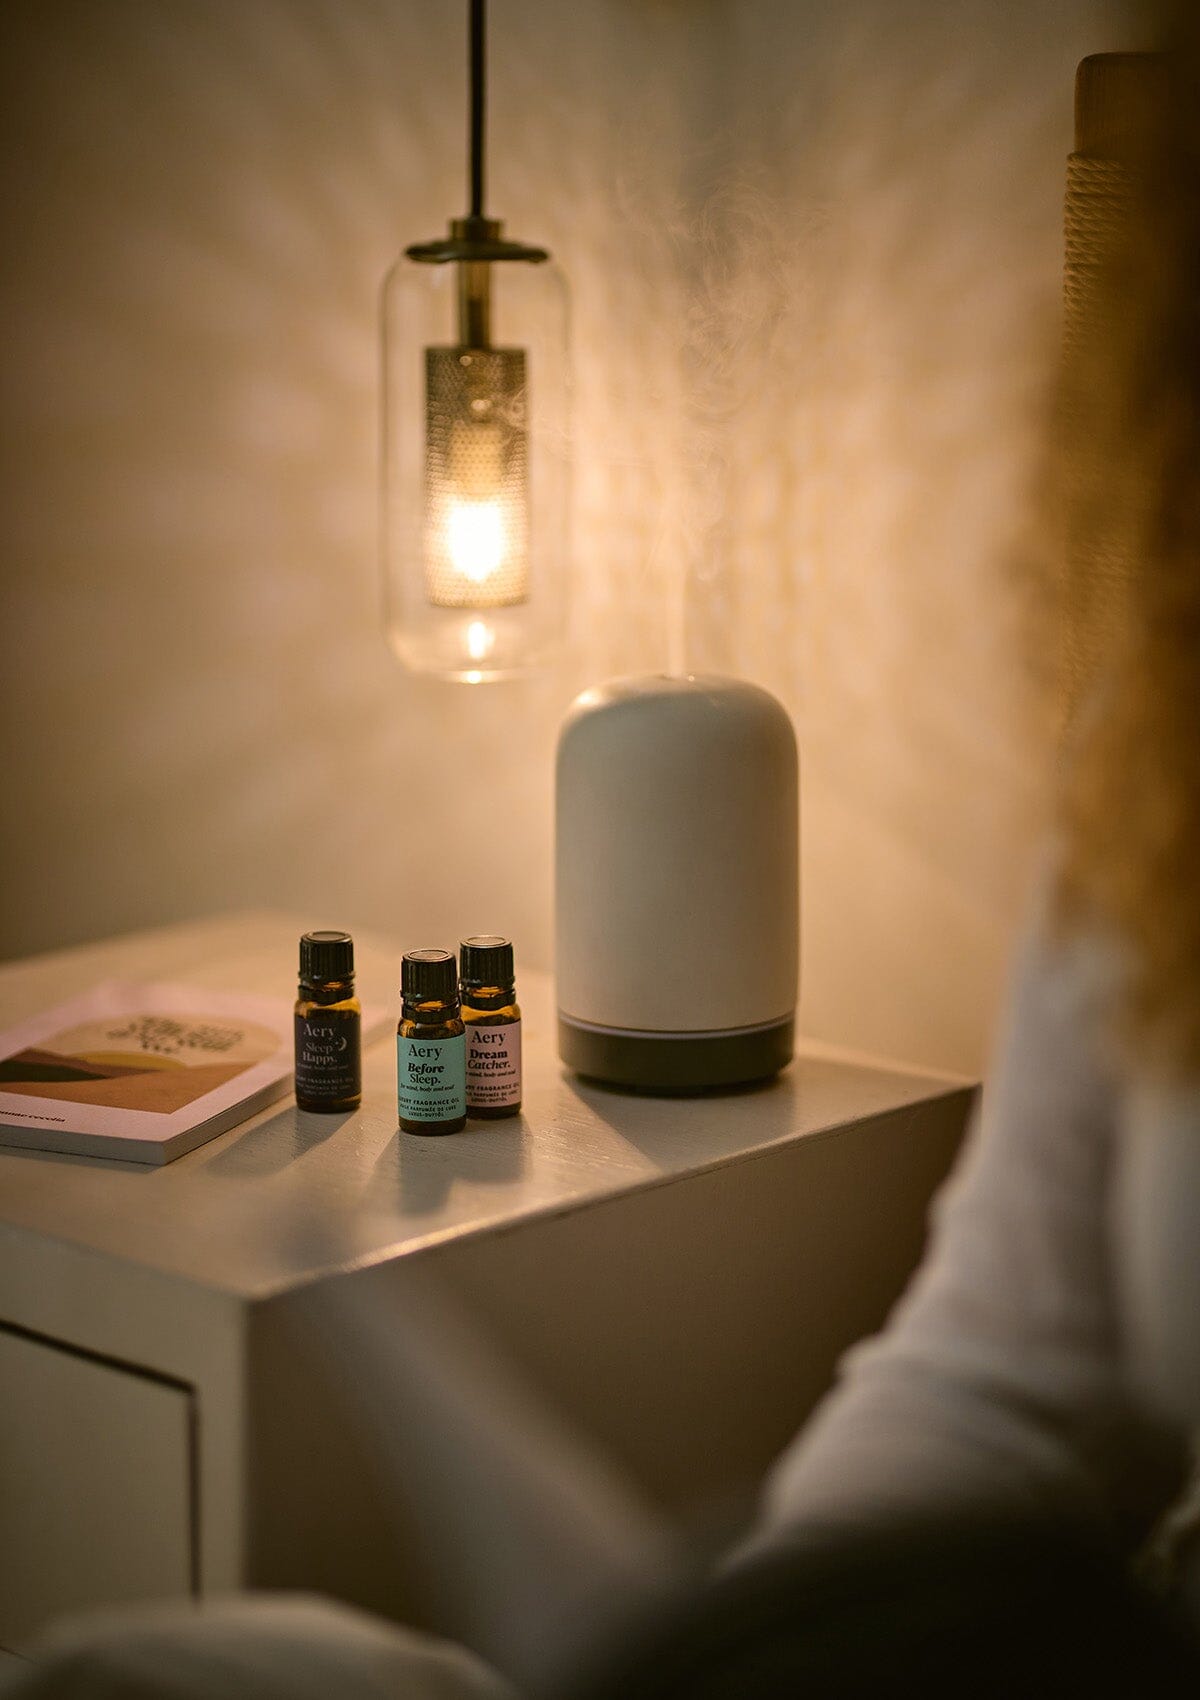 Sleep Therapy set of three fragrance oils by Aery displayed next to electric diffuser and book on bedside table 